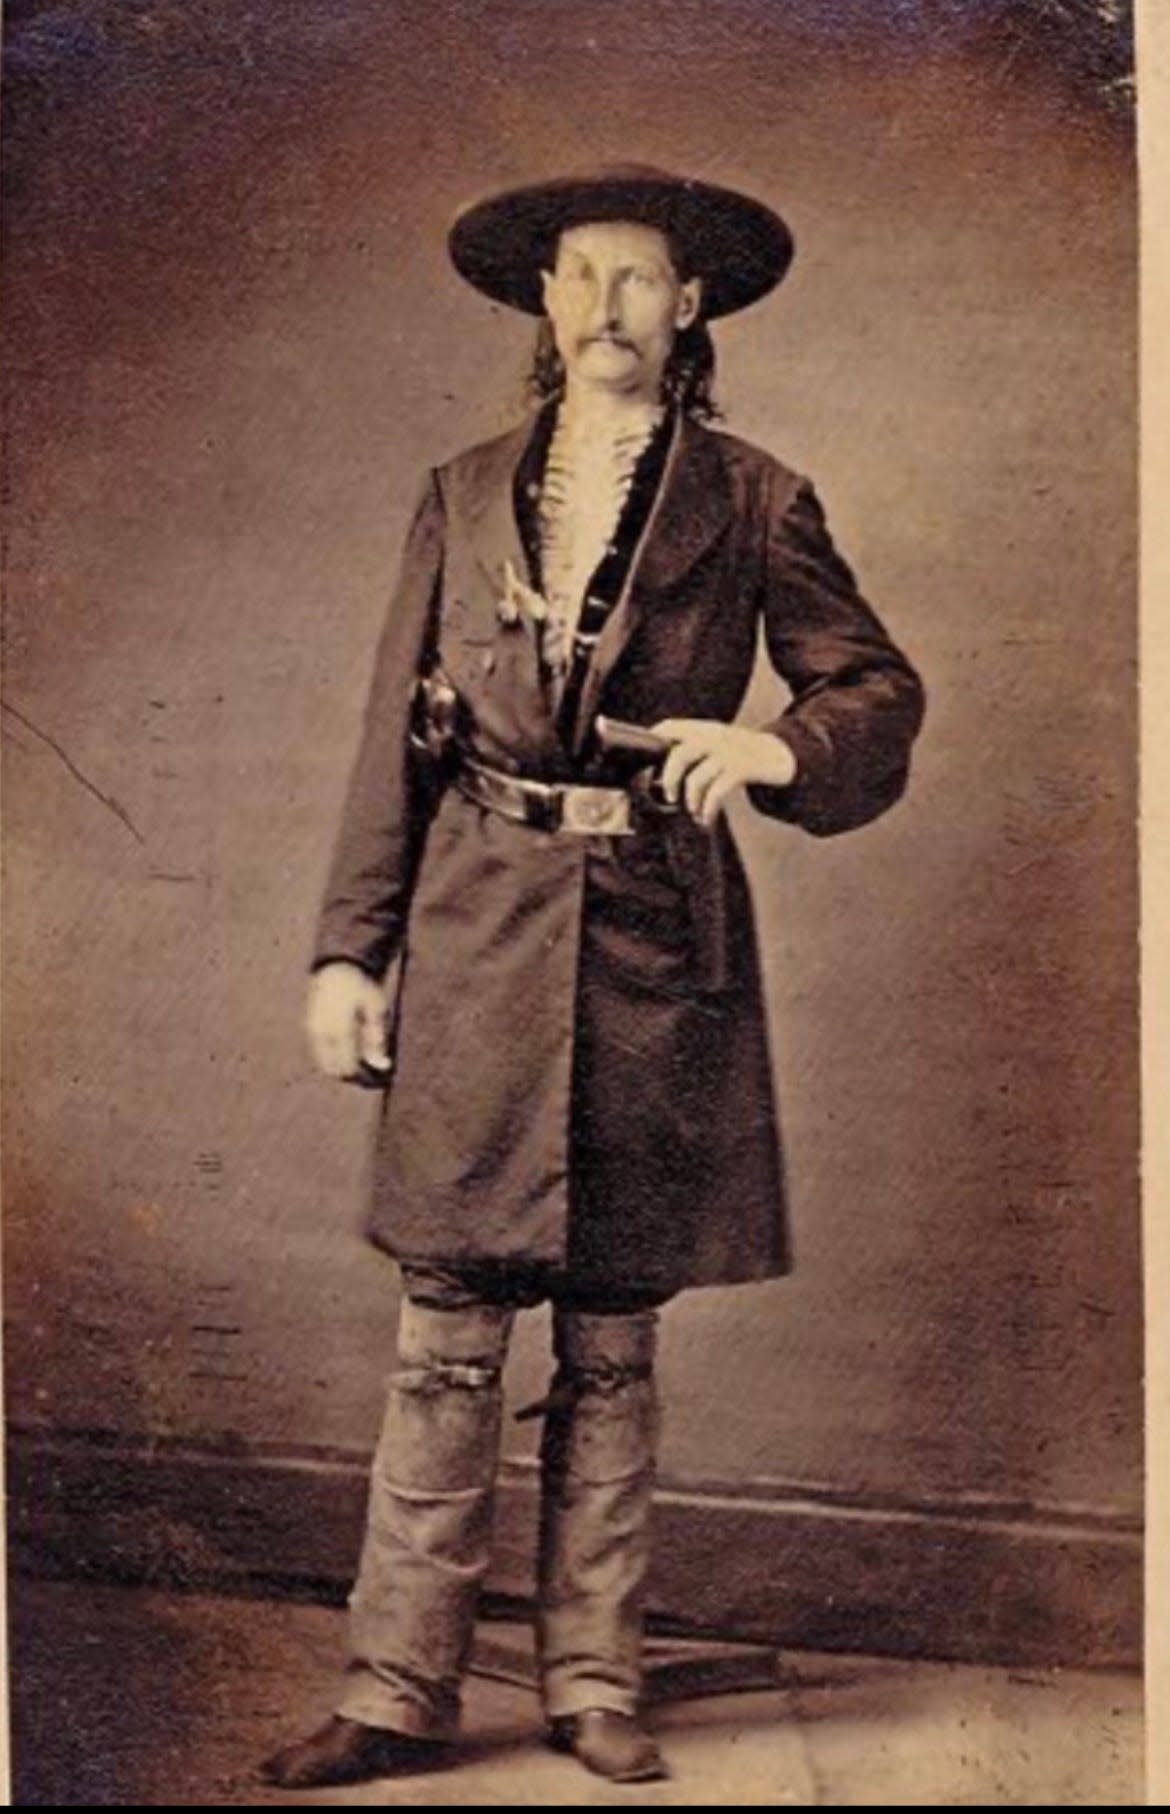 A photograph of James Butler Hickok, commonly known as "Wild Bill" Hickok, captured by Charles Scholten in Springfield, Missouri in 1865.